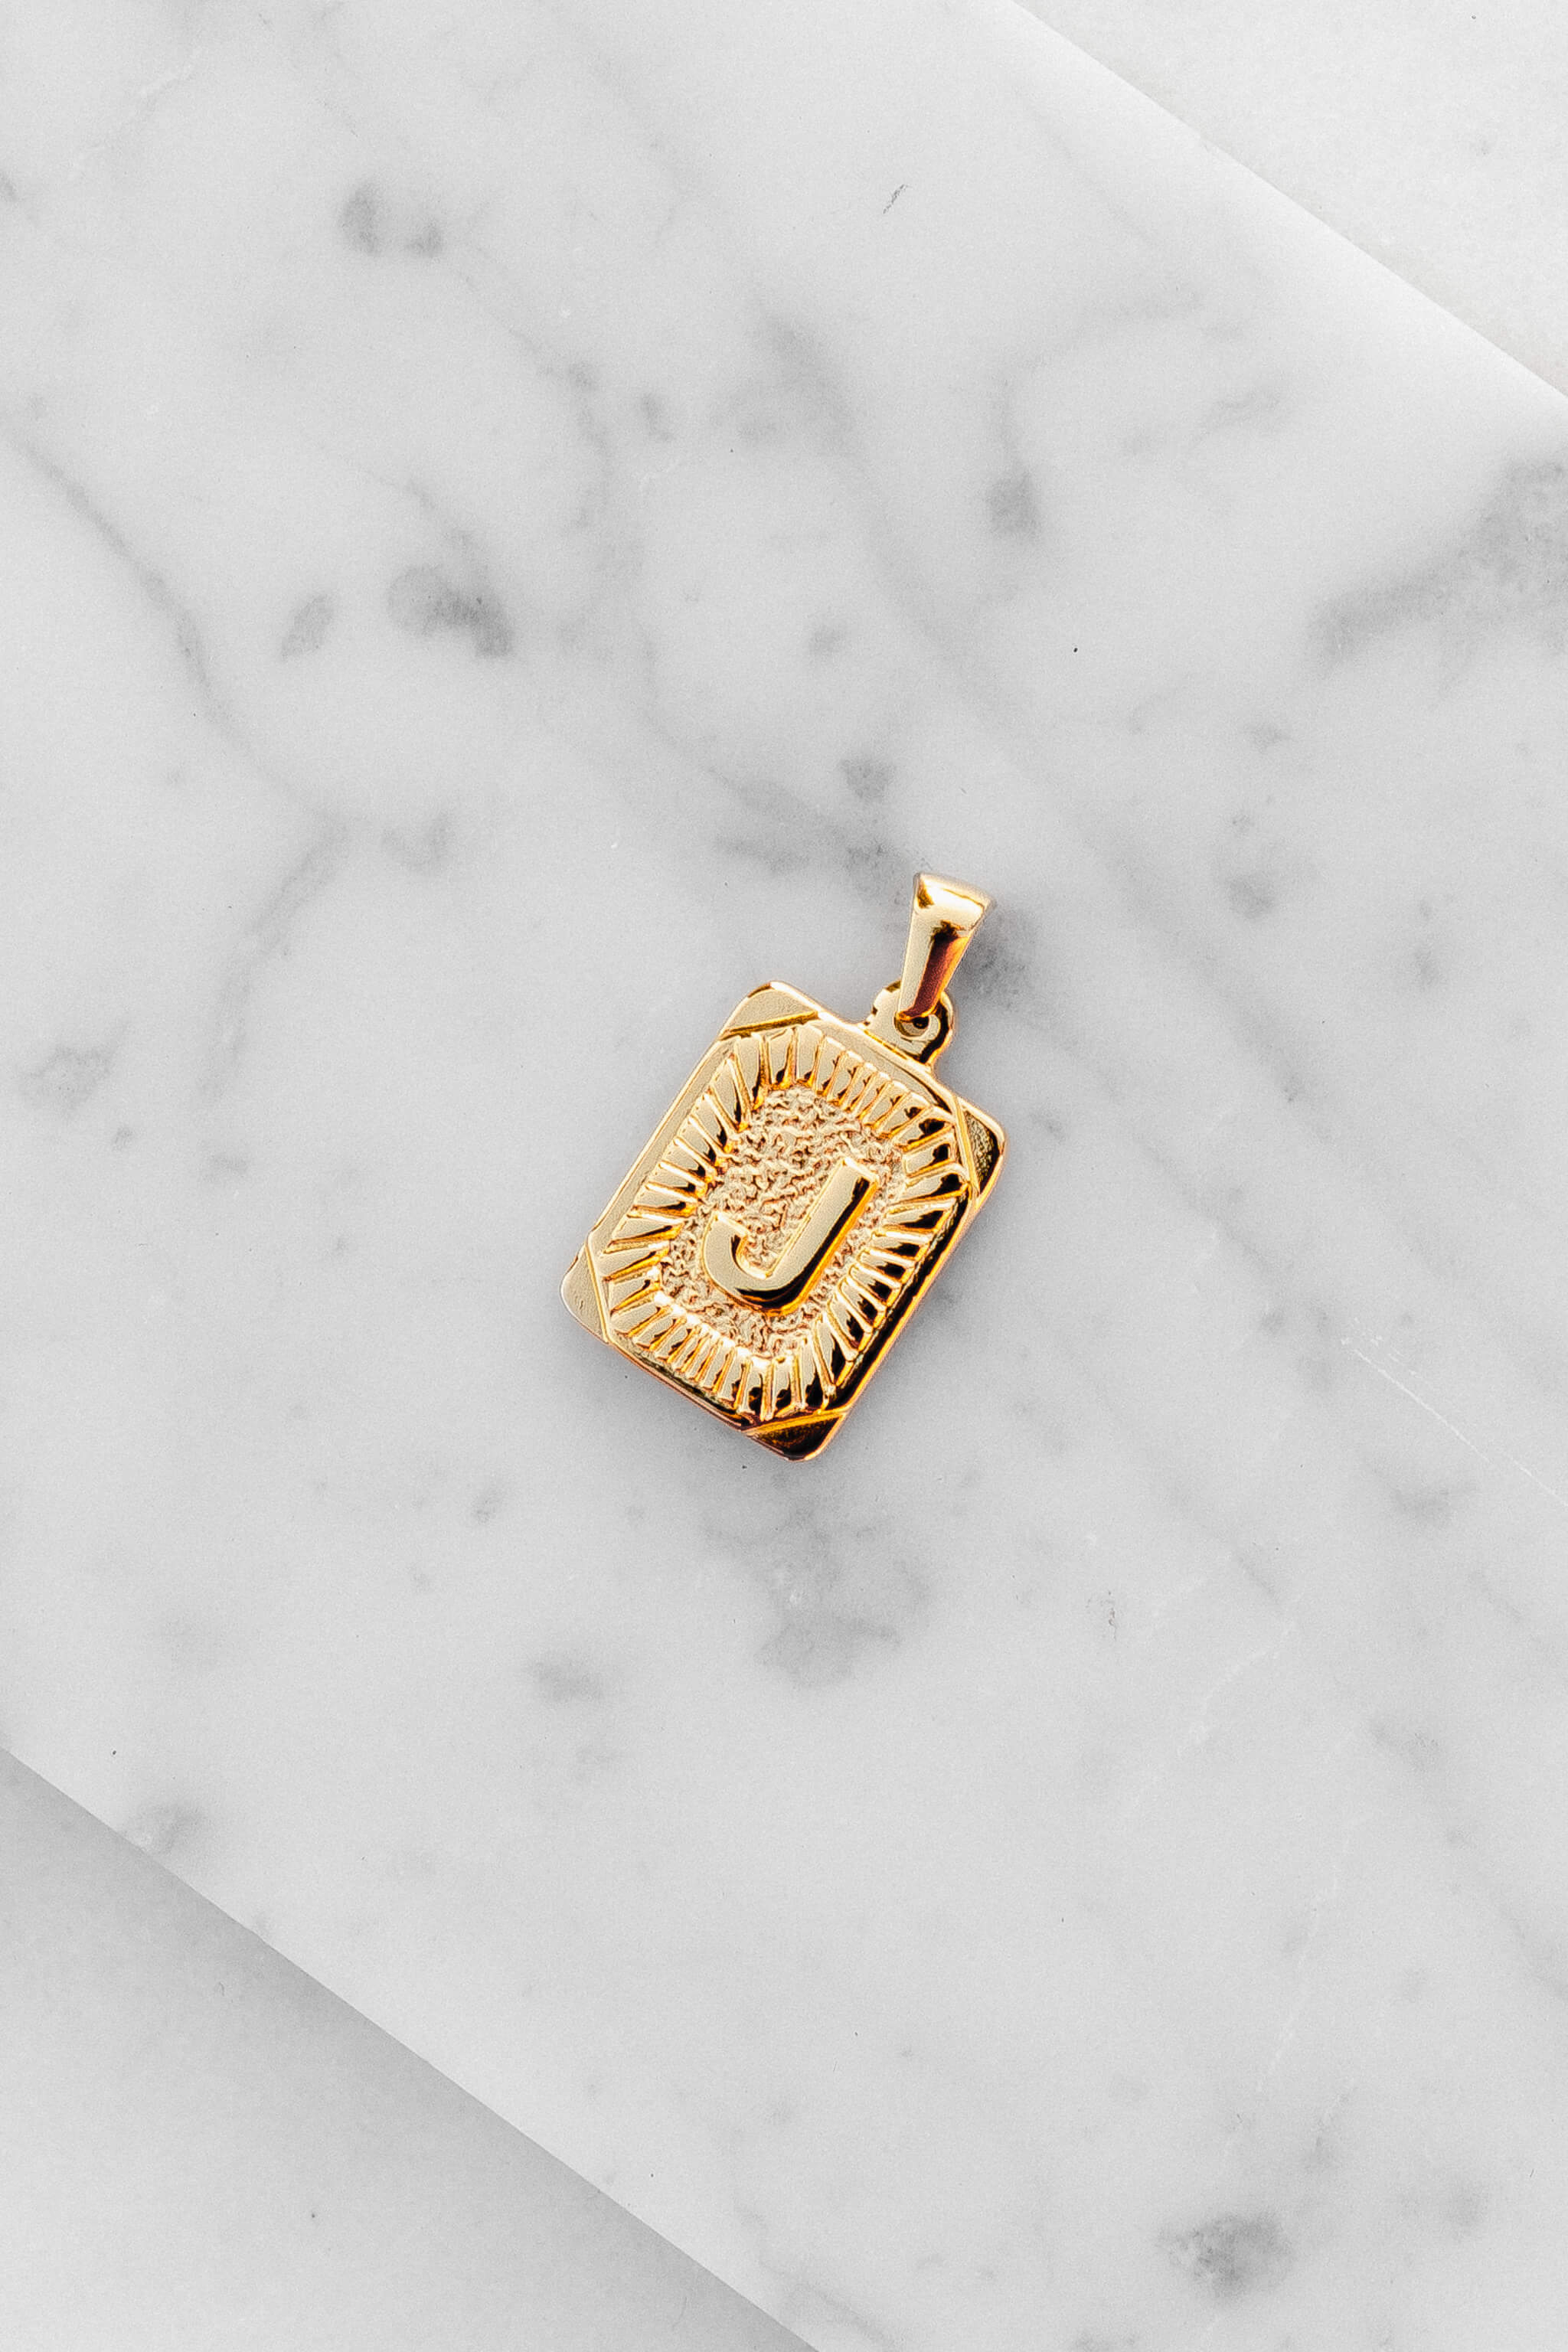 Gold Monogram Letter "J" Charm laying on a marble